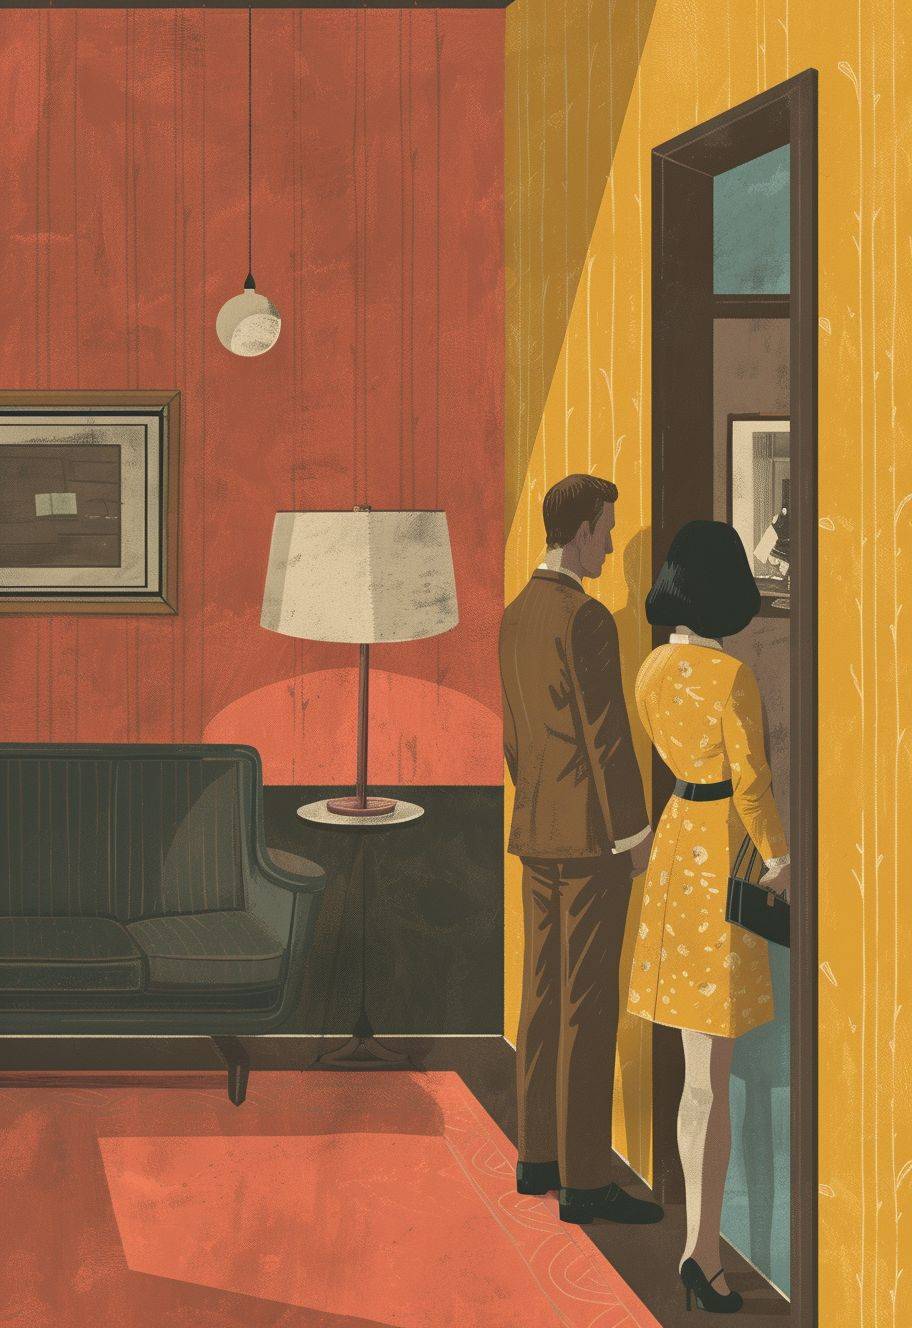 Create an illustration inspired by the design of Richard McGuire and the colors of Wes Anderson, conveying the following prediction in a vintage, creative, trendy, and unexpected manner, without any text in the visual: Take a pause from deep talks today. Misunderstandings may arise from small annoyances. Wait for a better day to have those heartfelt conversations - it's just around the corner. Trust us, your future self will thank you!